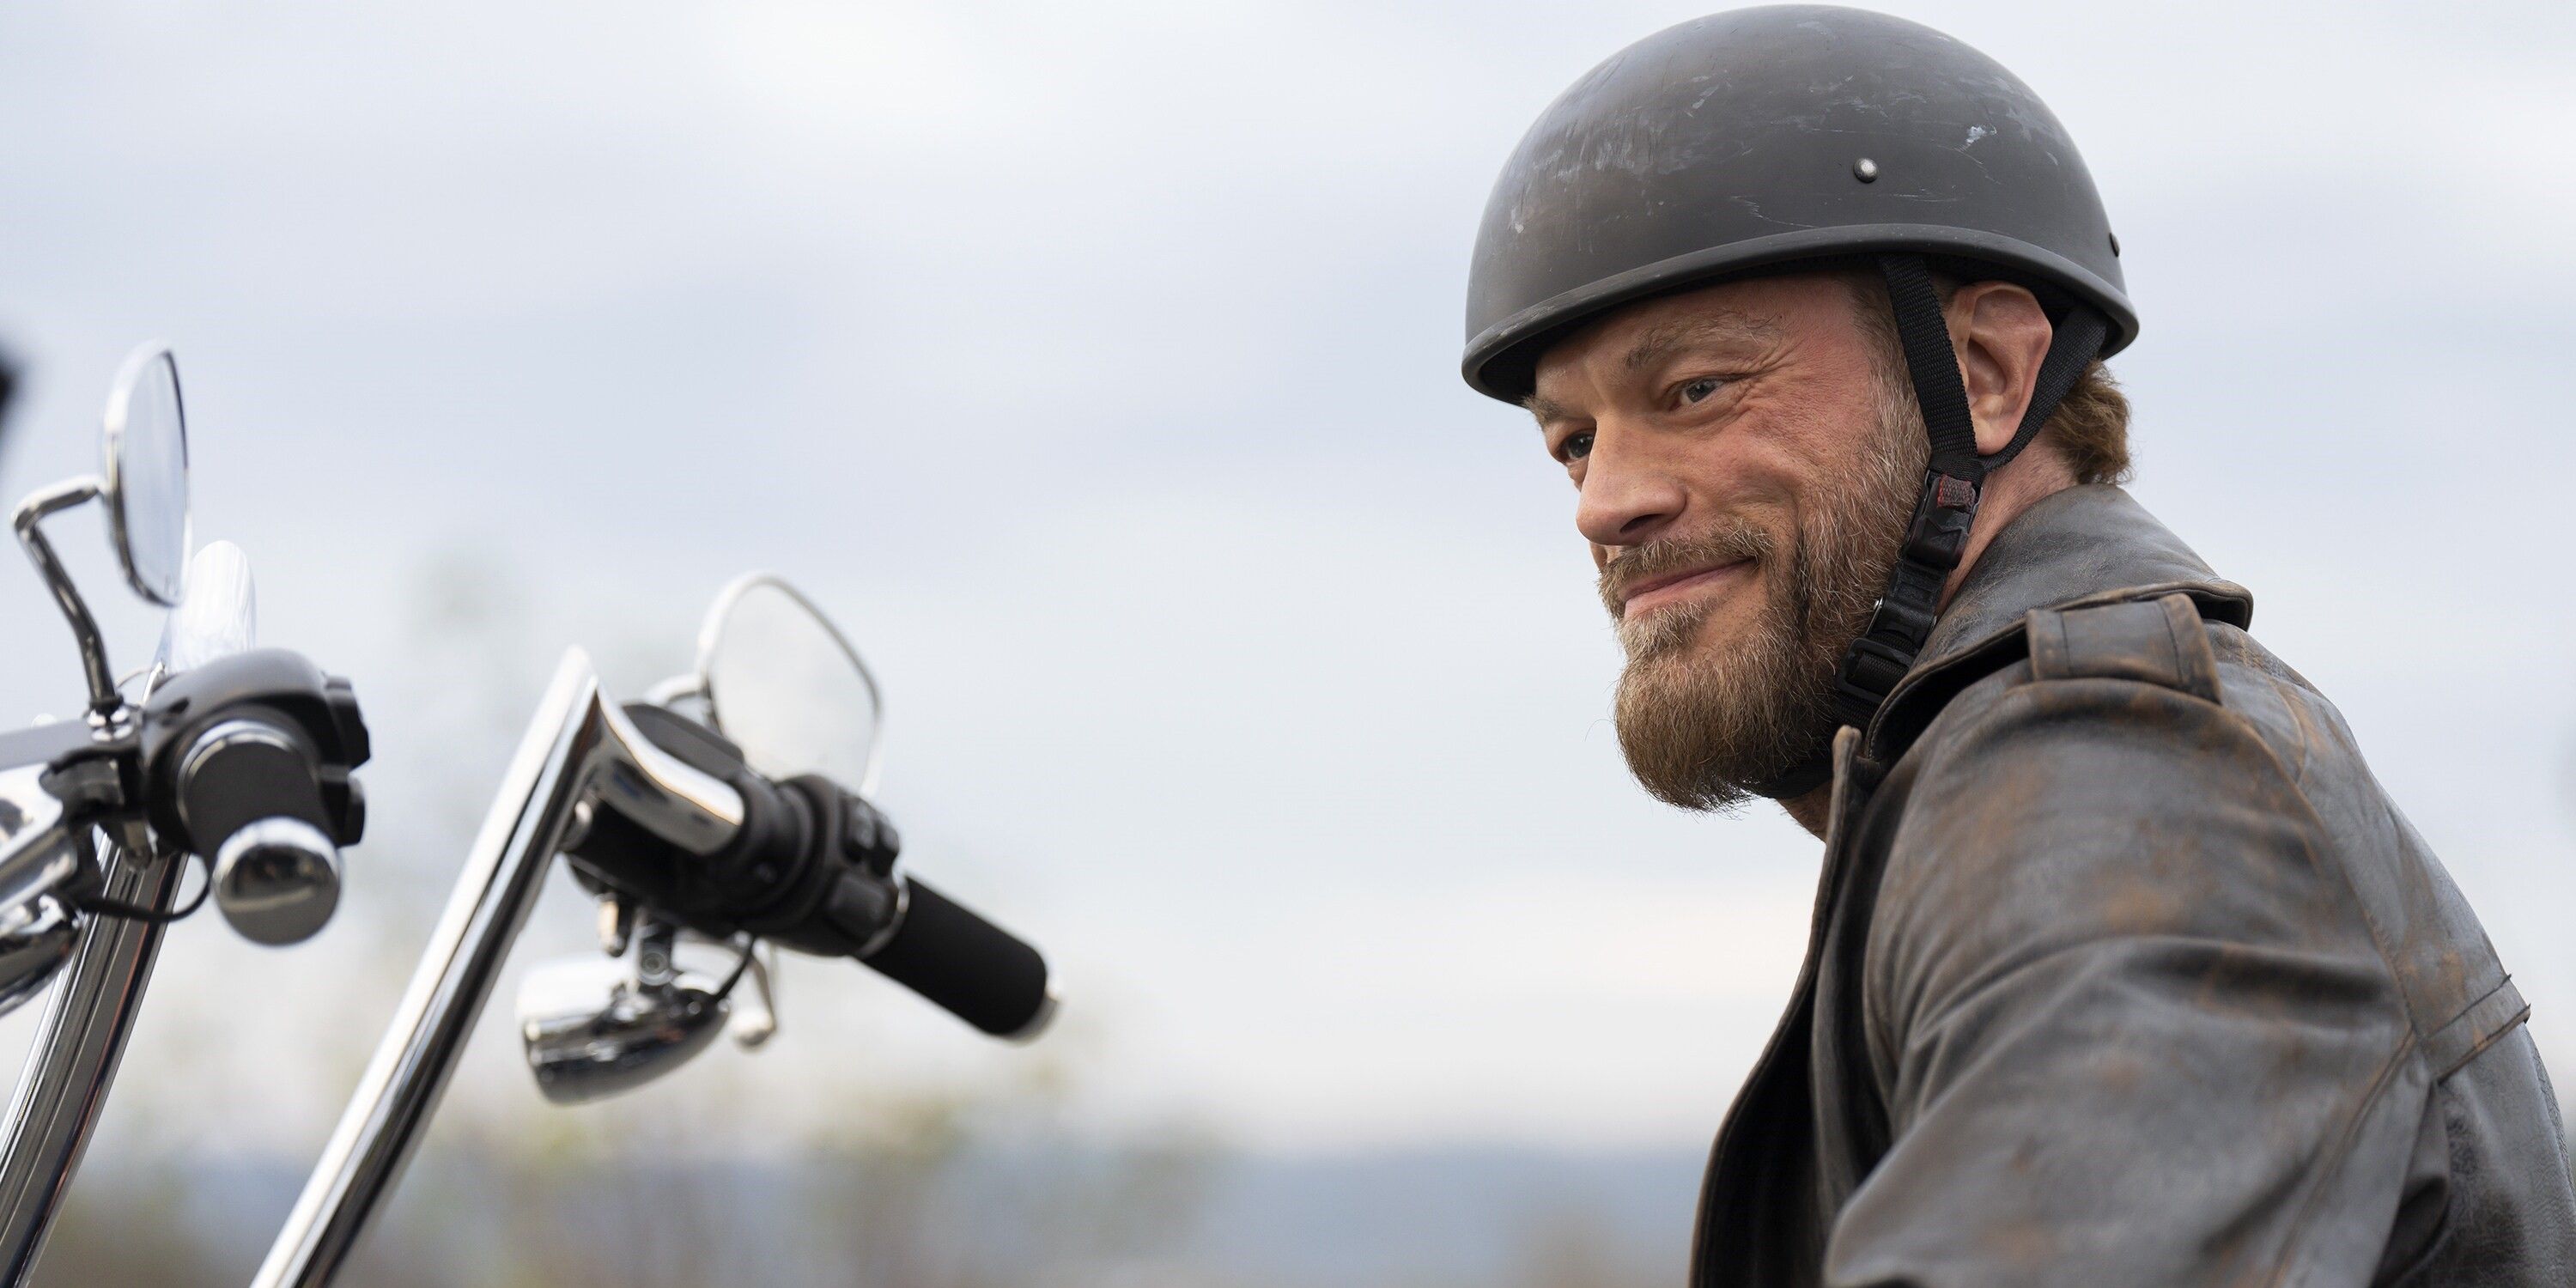 Adam Copeland as Ares riding a motorcycle with his helmet on in Percy Jackson & the Olympians episode 5